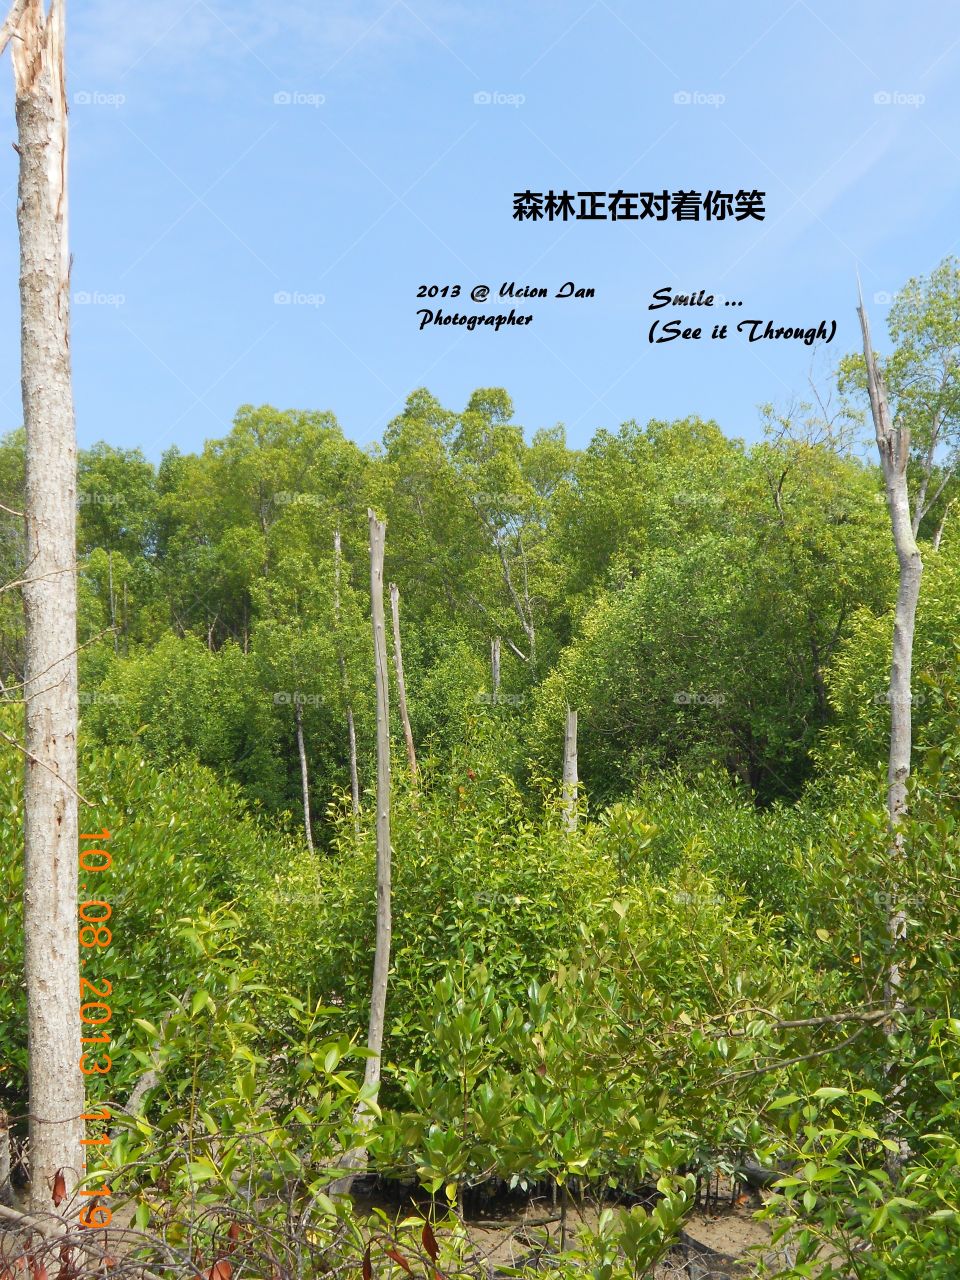 Smiling Forest-微笑D森林. If U feel Angry, U will seeing The Forest is Smiling. And If U Happy, U won't See It.
当你正在生气,你会看见森林对你微笑,要你放松一心情,别老生气。